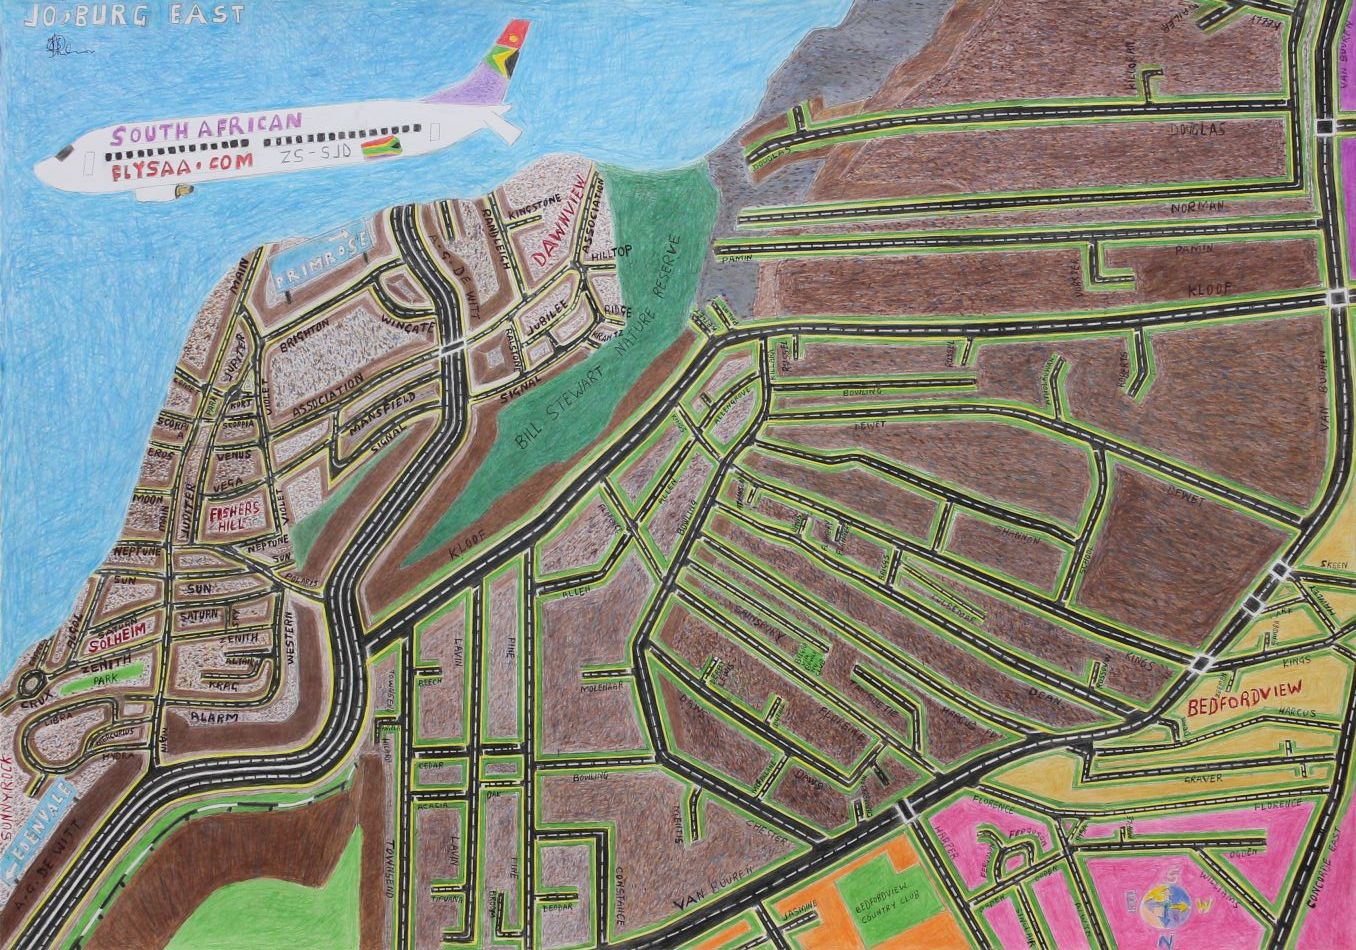 Click the image for a view of: Jo'burg East. 2013. Colour pencil on paper. 860X710mm